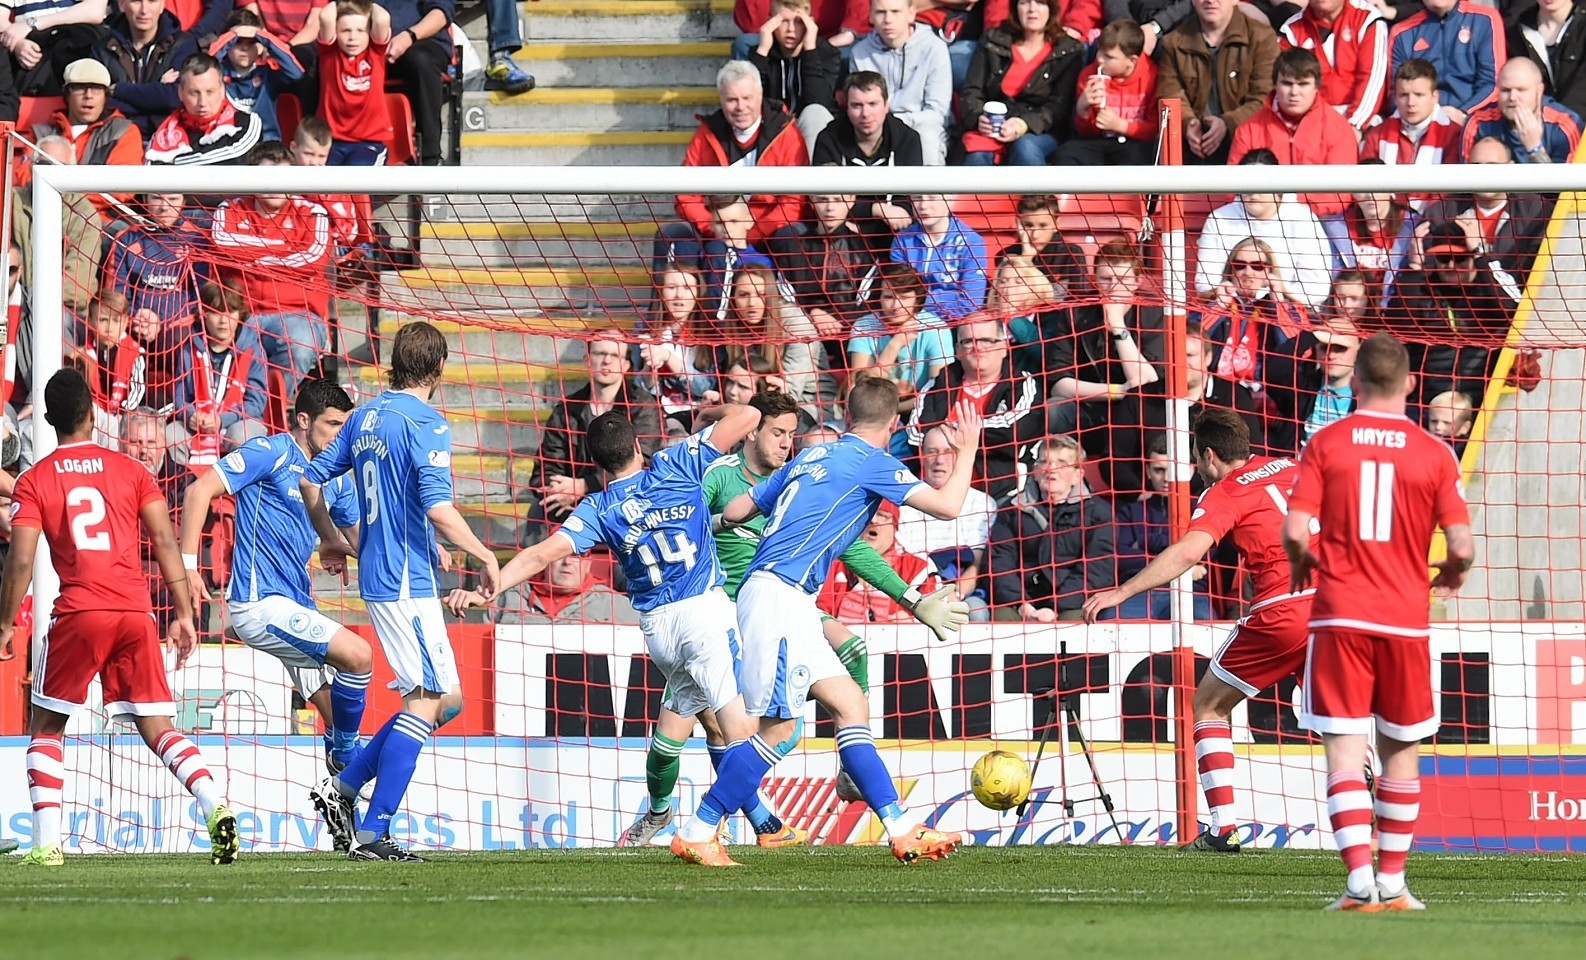 St Johnstone's Joe Shaughnessy (14) doubles the lead for his side